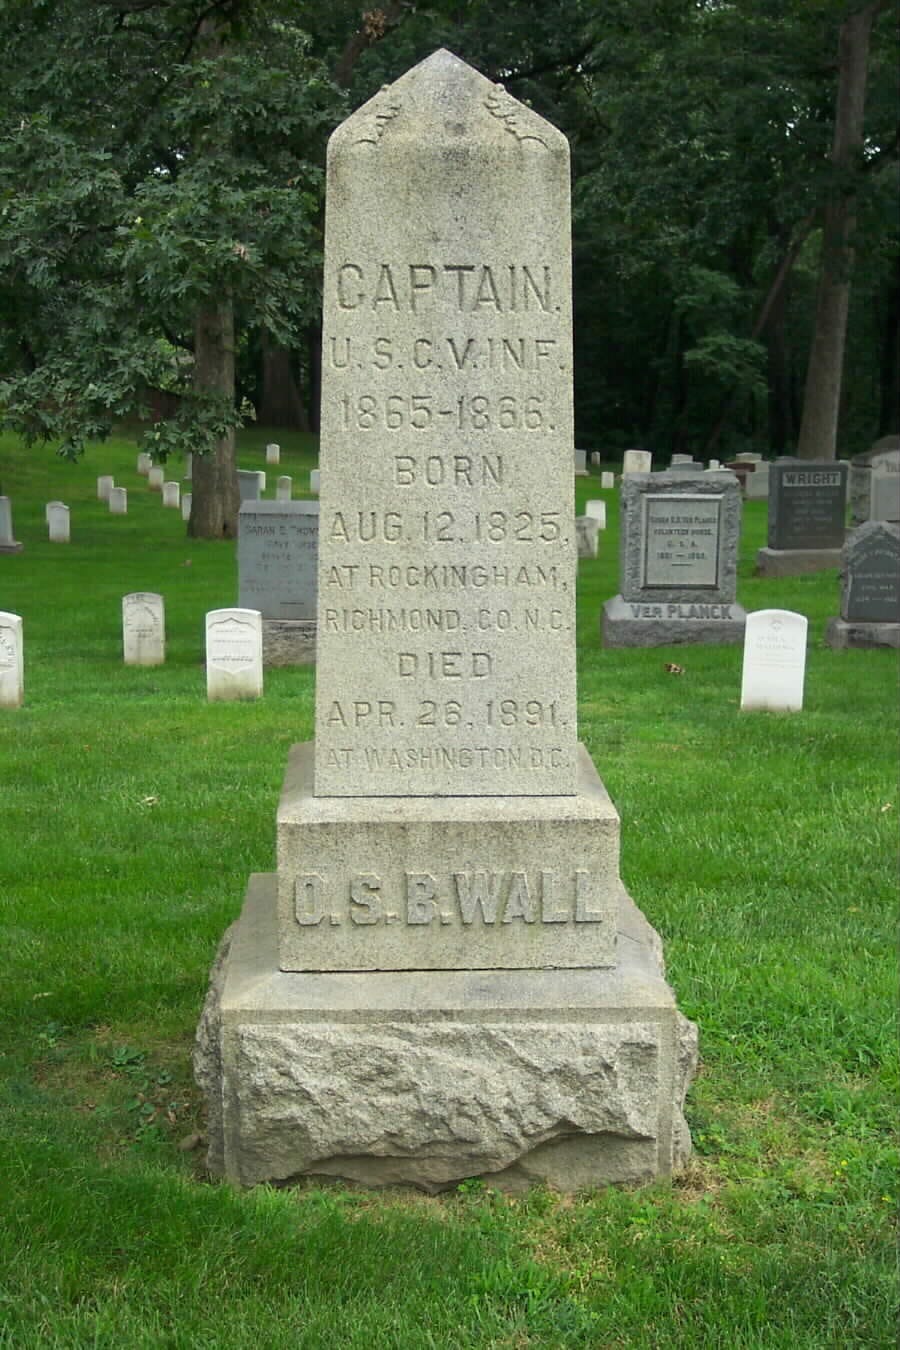 Orindatus S. B. Wall - Captain, United States Army